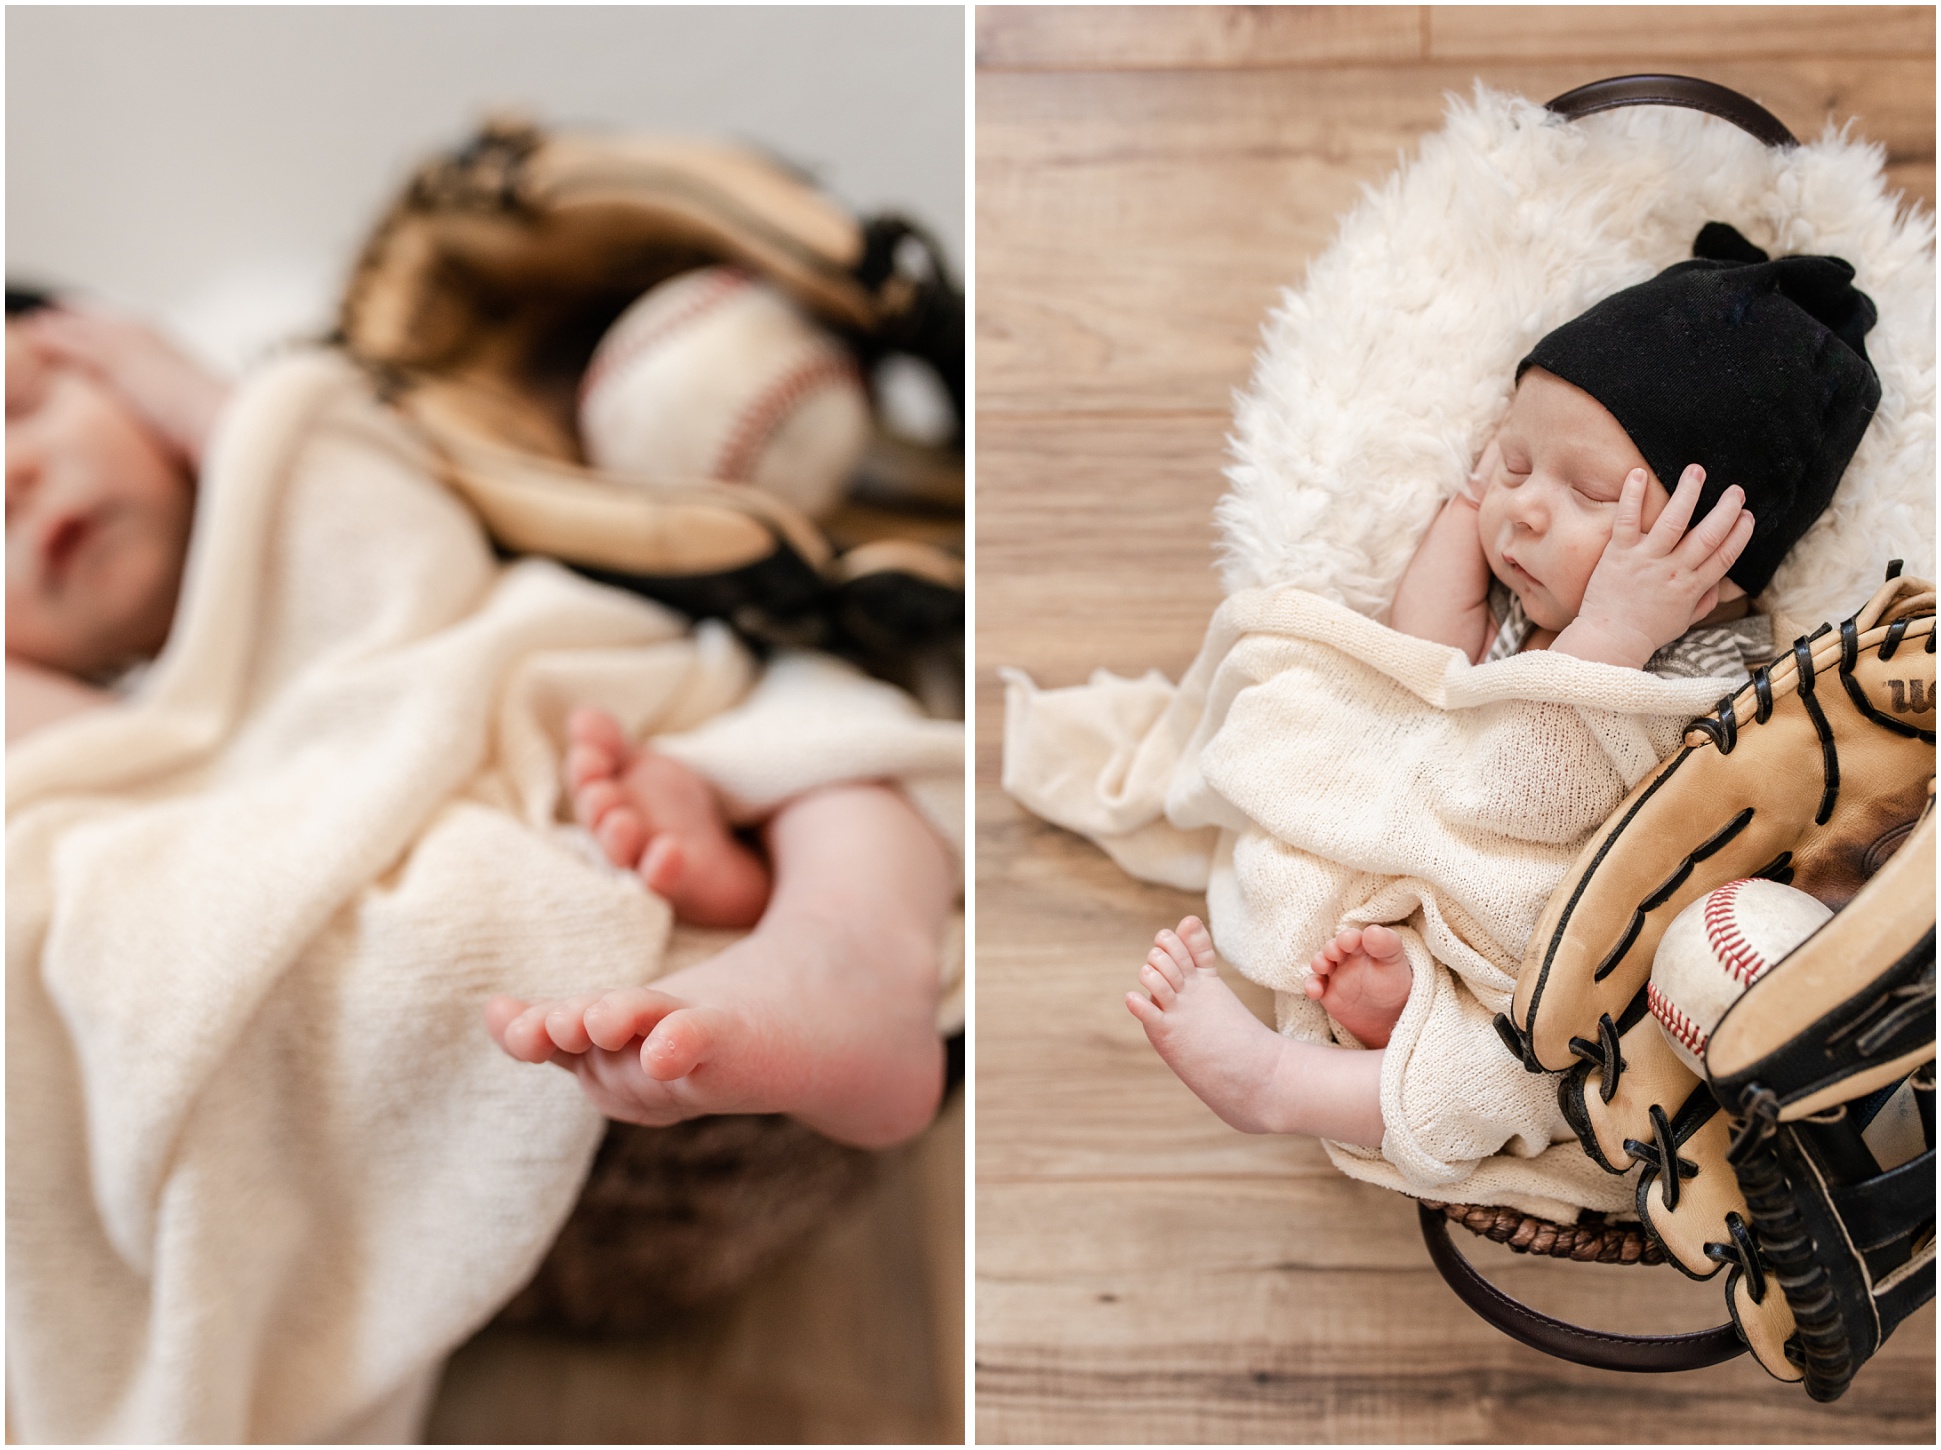 newborn baby's toes sticking out of cream colored wrap in basket with baseball and baseball glove in background; newborn in black beanie with cream colored wrap in fuzzy basket